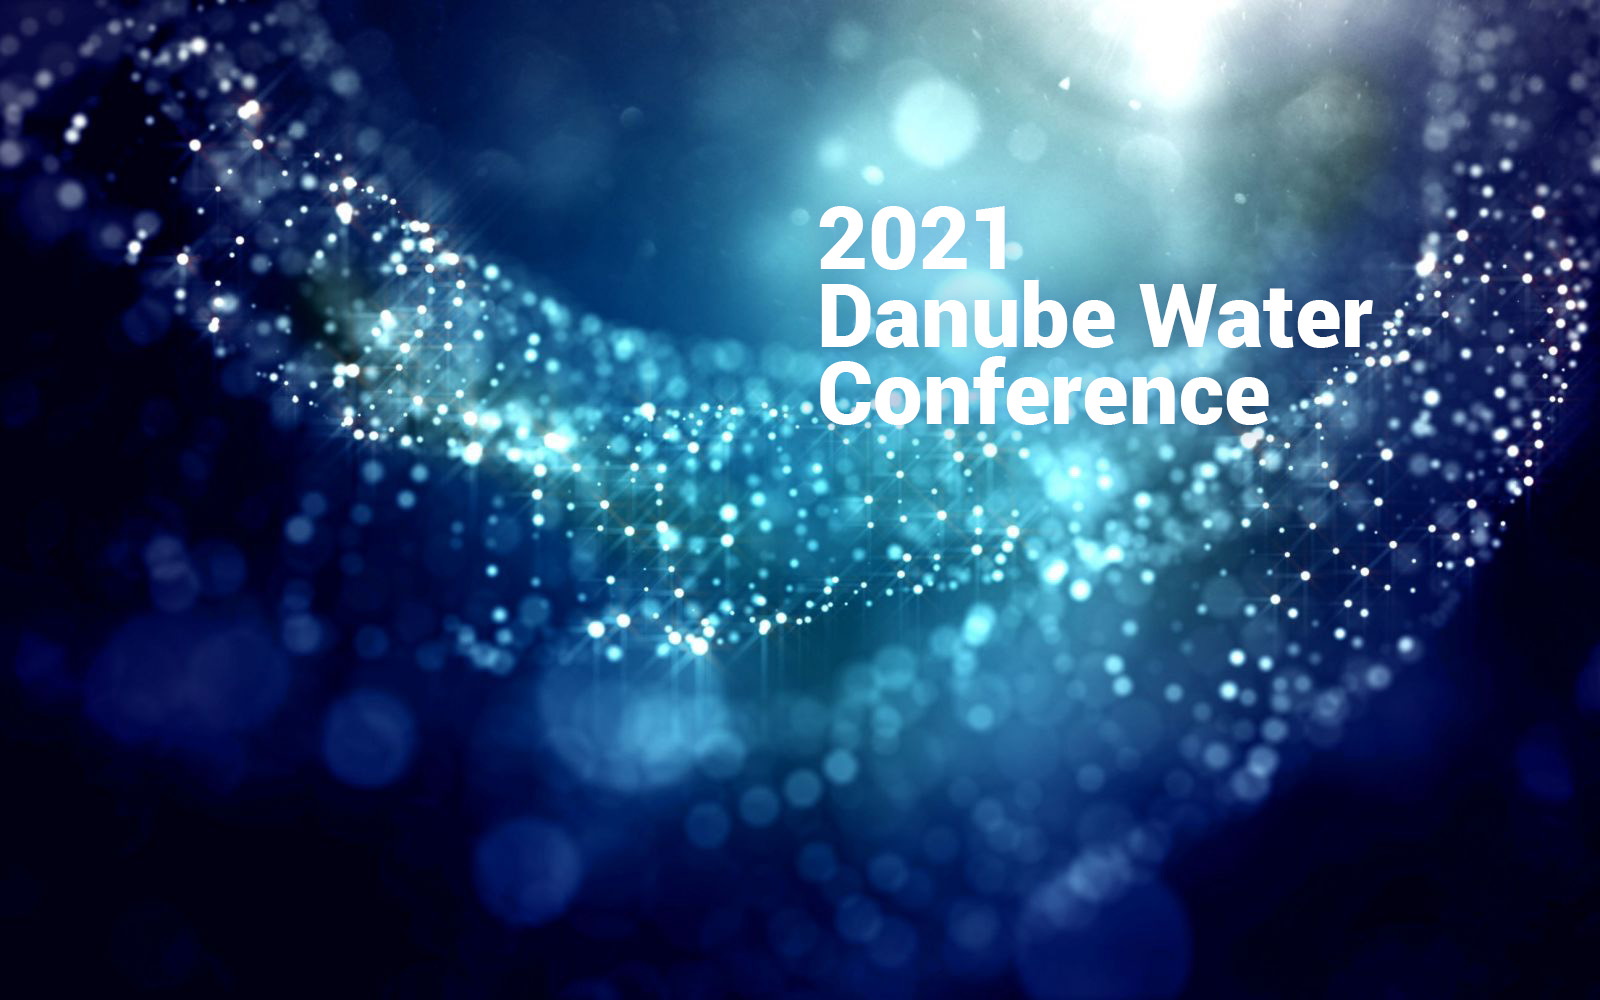 2021 Danube Water Conference: I'll be There. Will You?